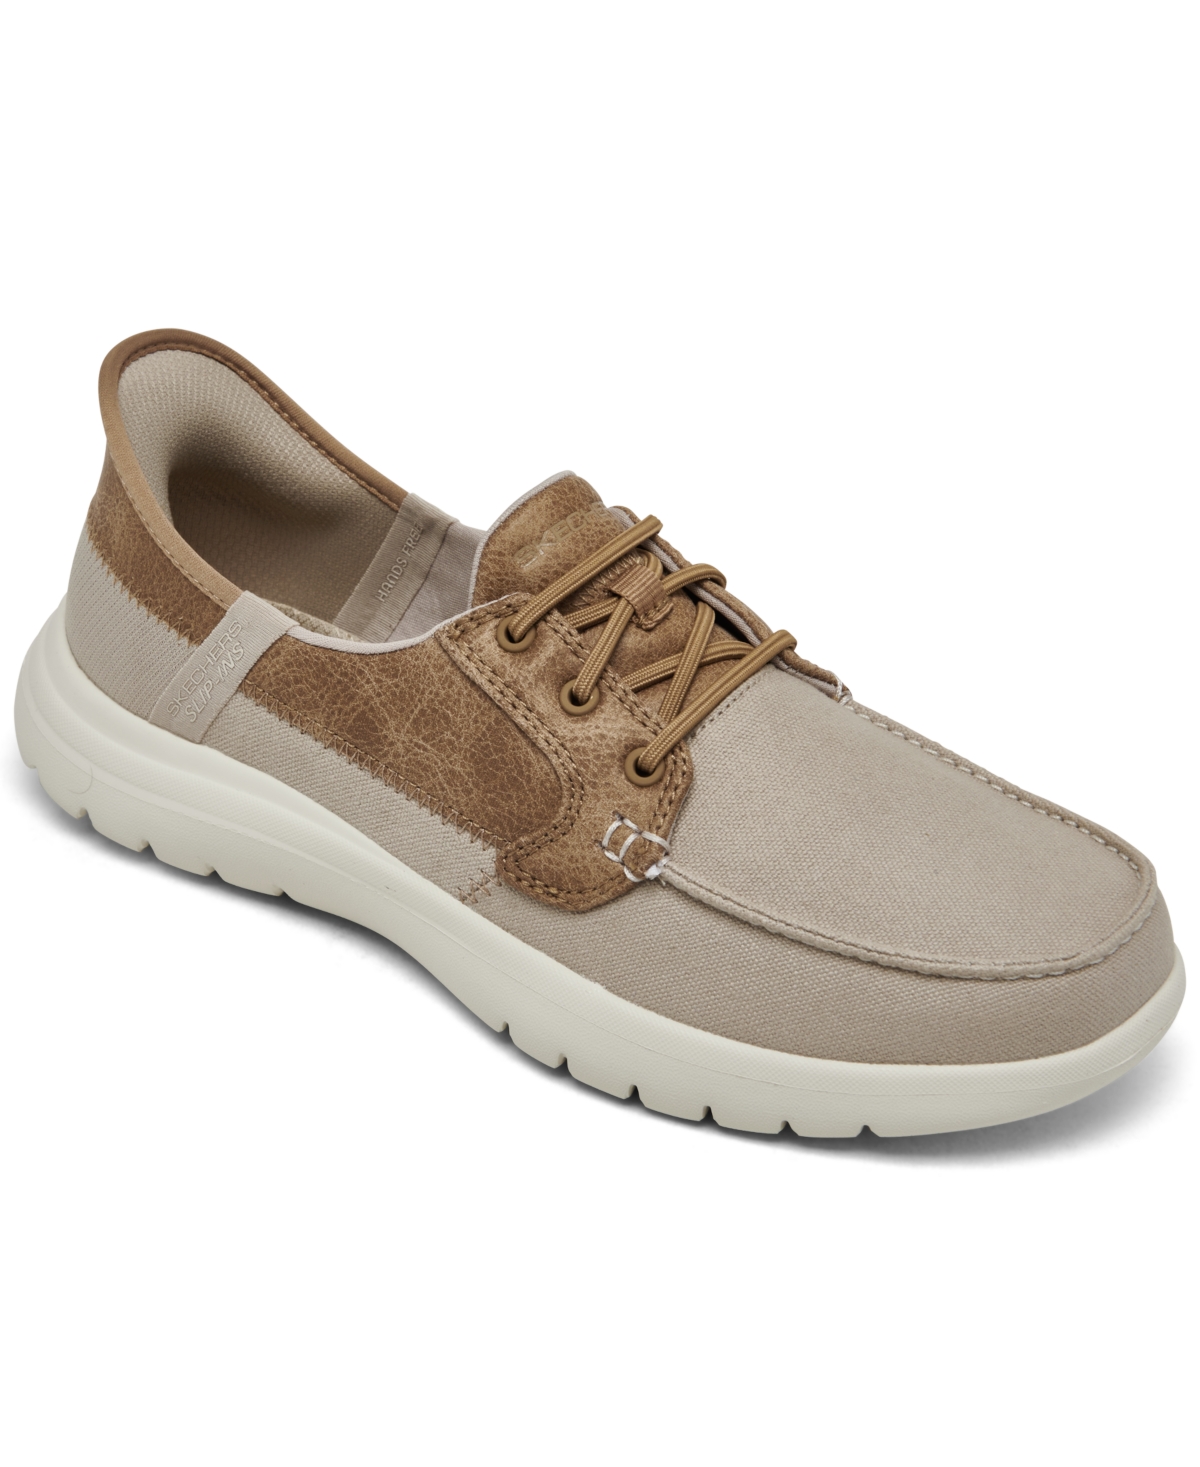 Women's Slip-Ins-On-the-go Flex-Palmilla Casual Sneakers from Finish Line - Taupe